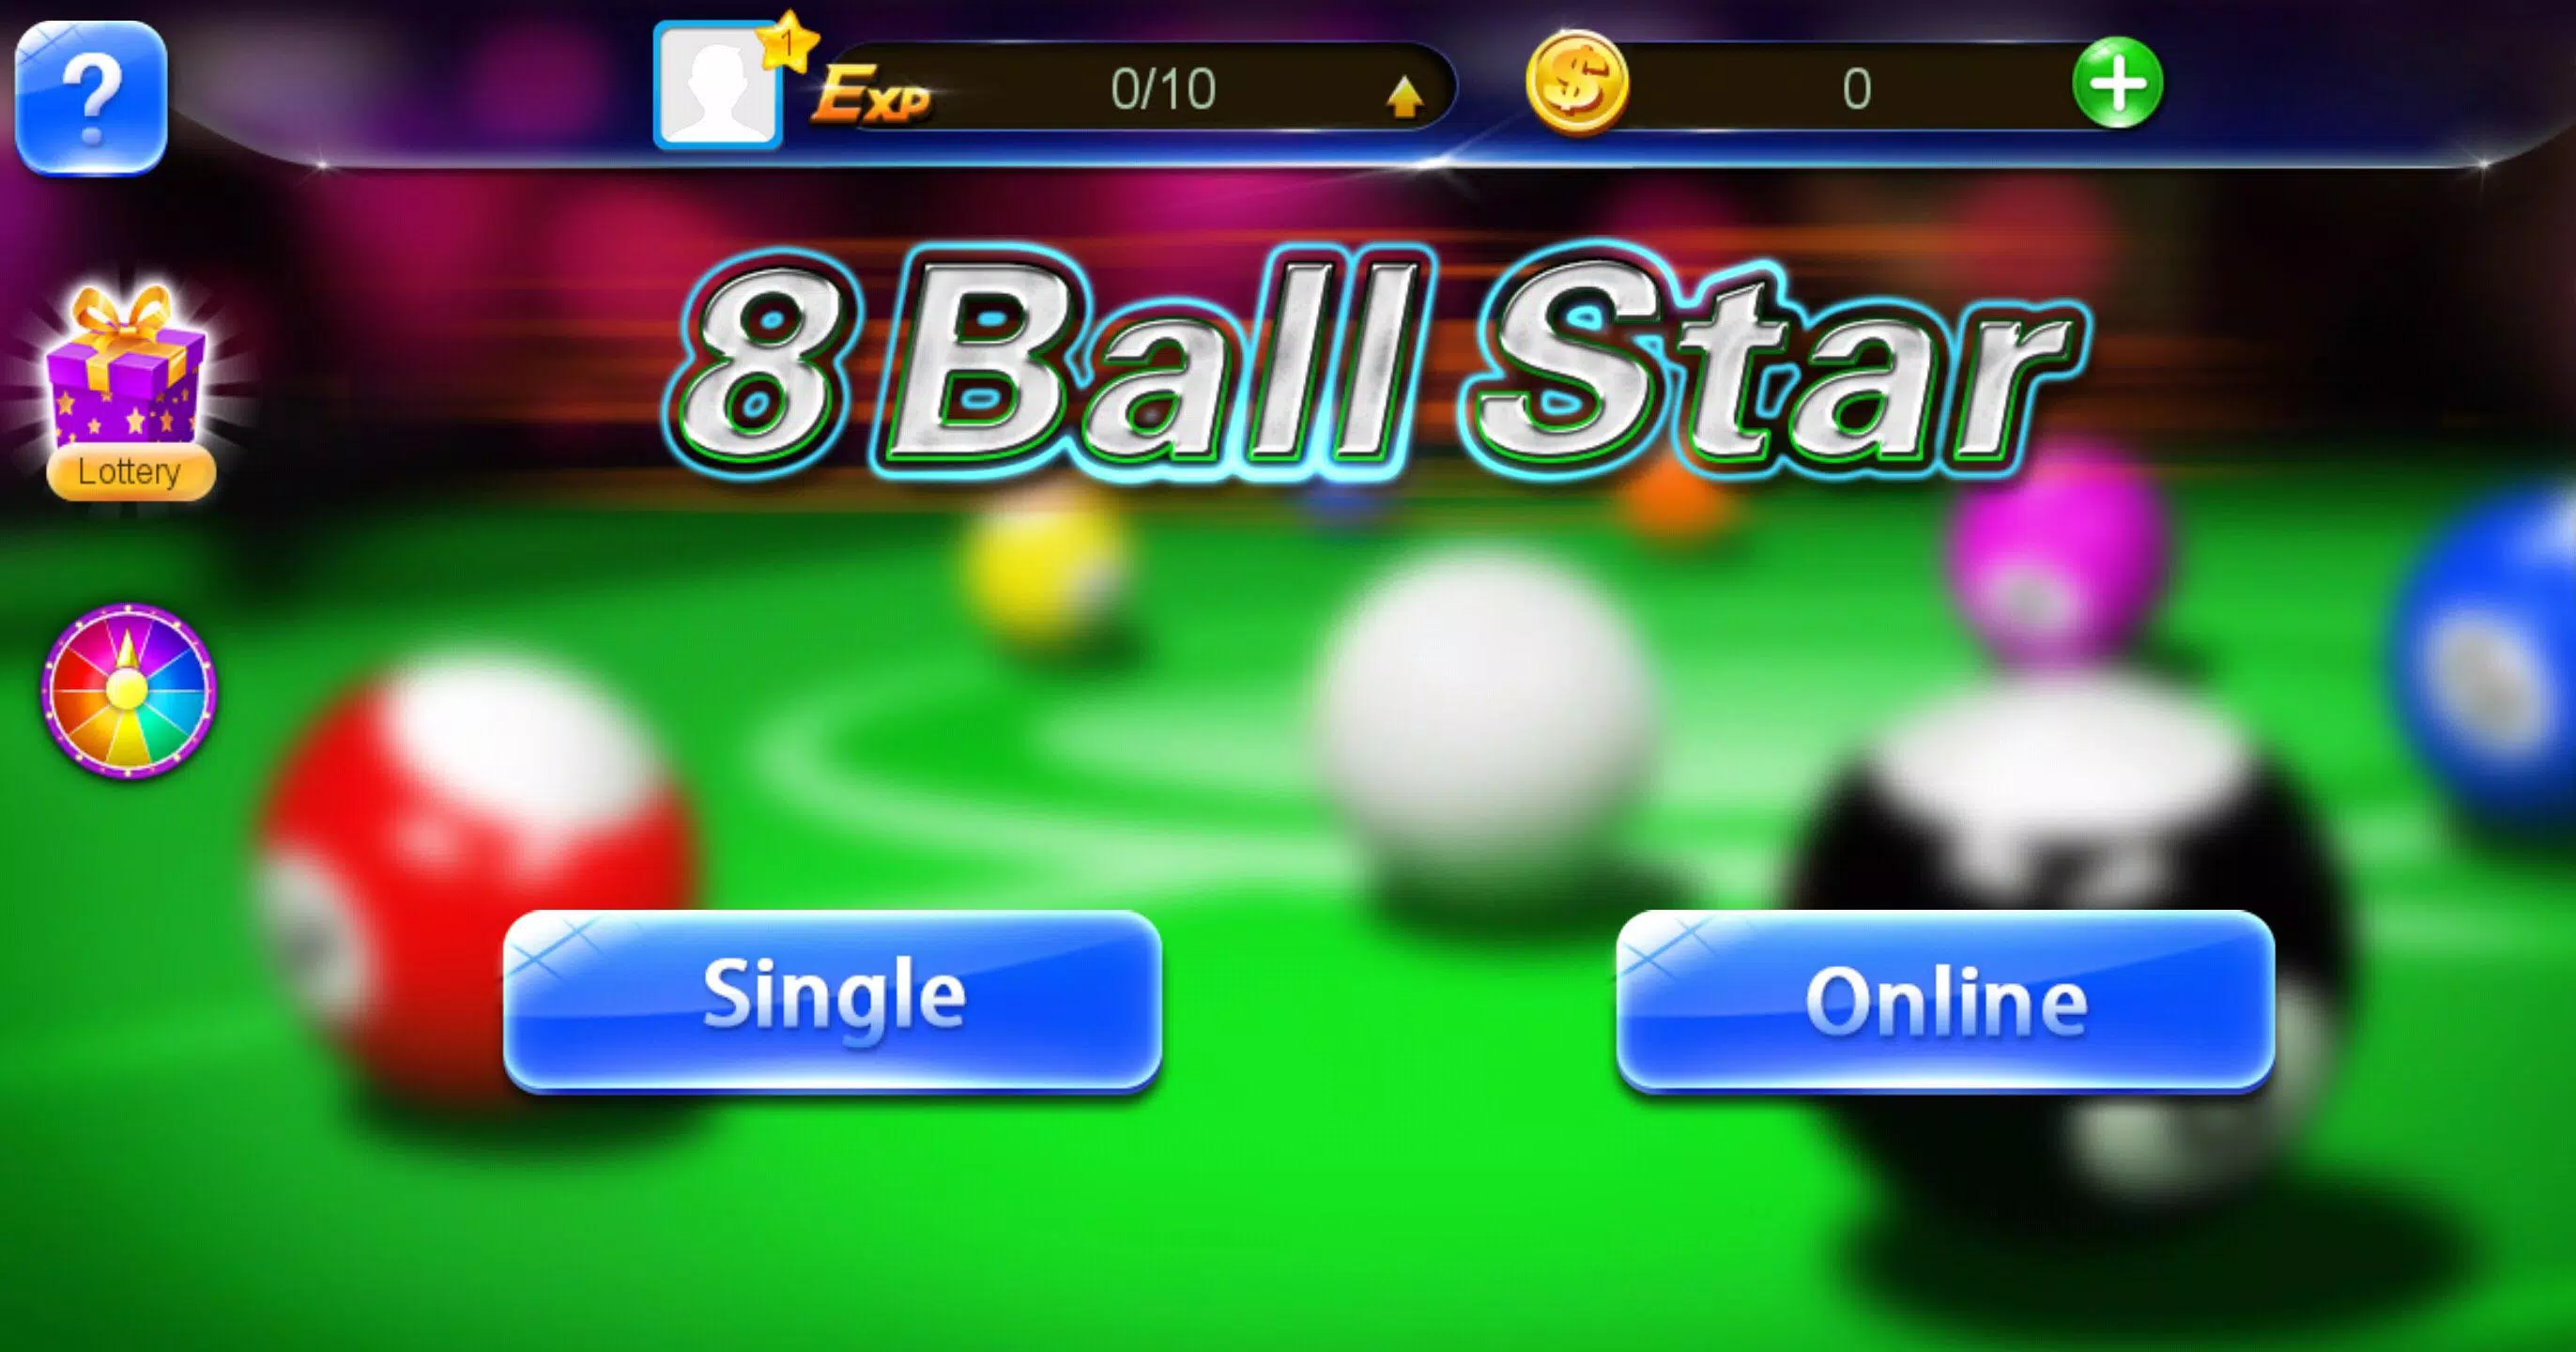 New Billiard Online Offline 2020 Game for Android - Download